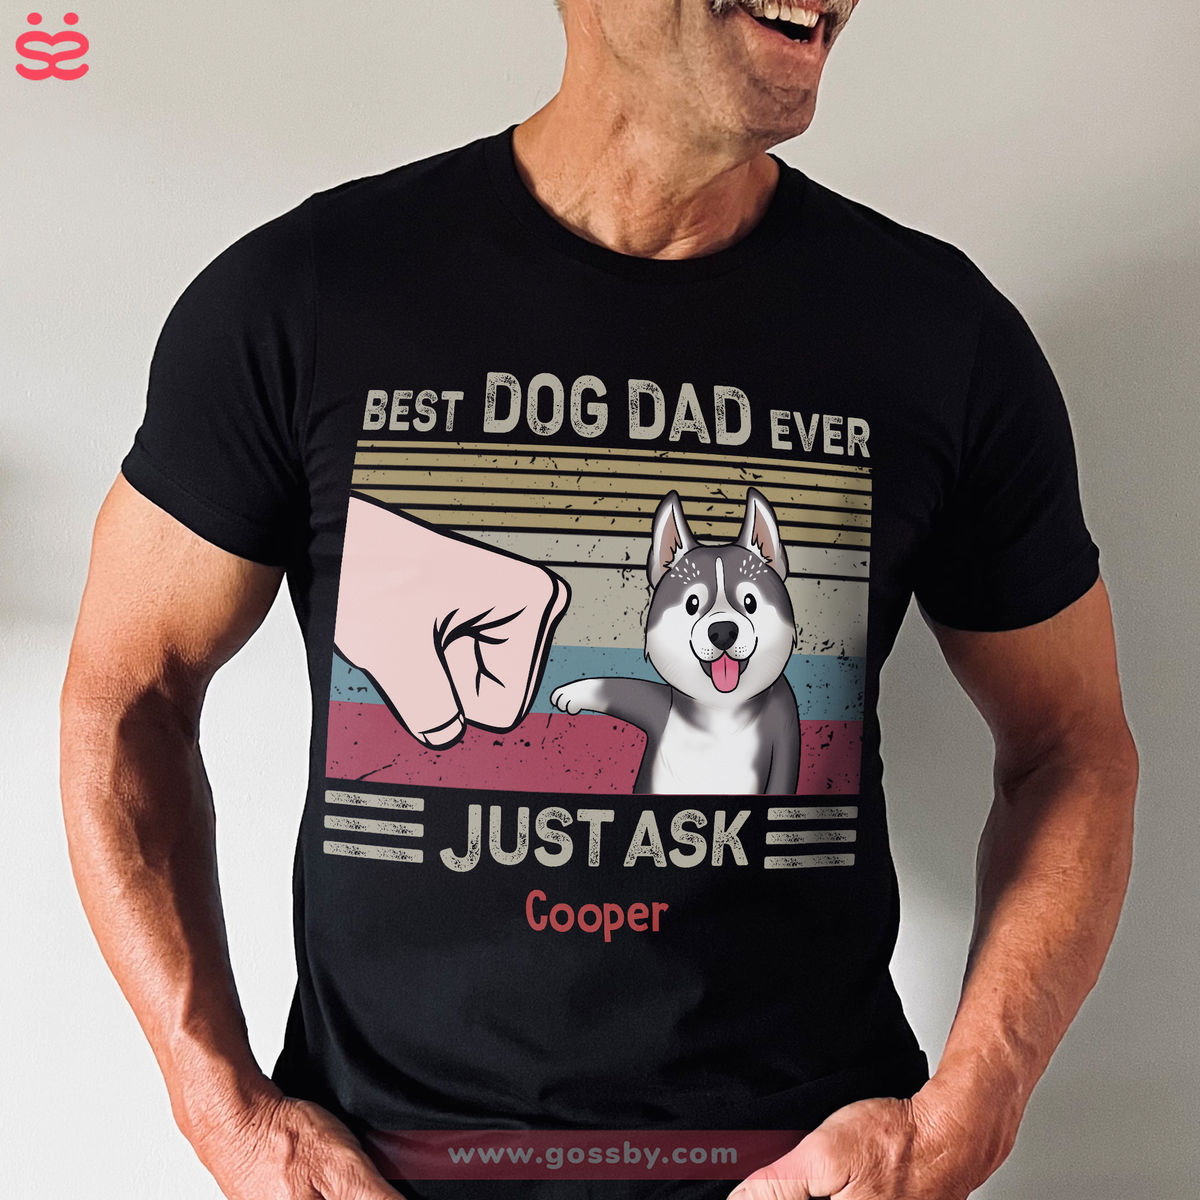 Dog Dad T-shirt - Best Dog Dad Ever Just Ask - Father's Day Gift, Birthday Gifts, Gifts For Dad - Personalized Shirt